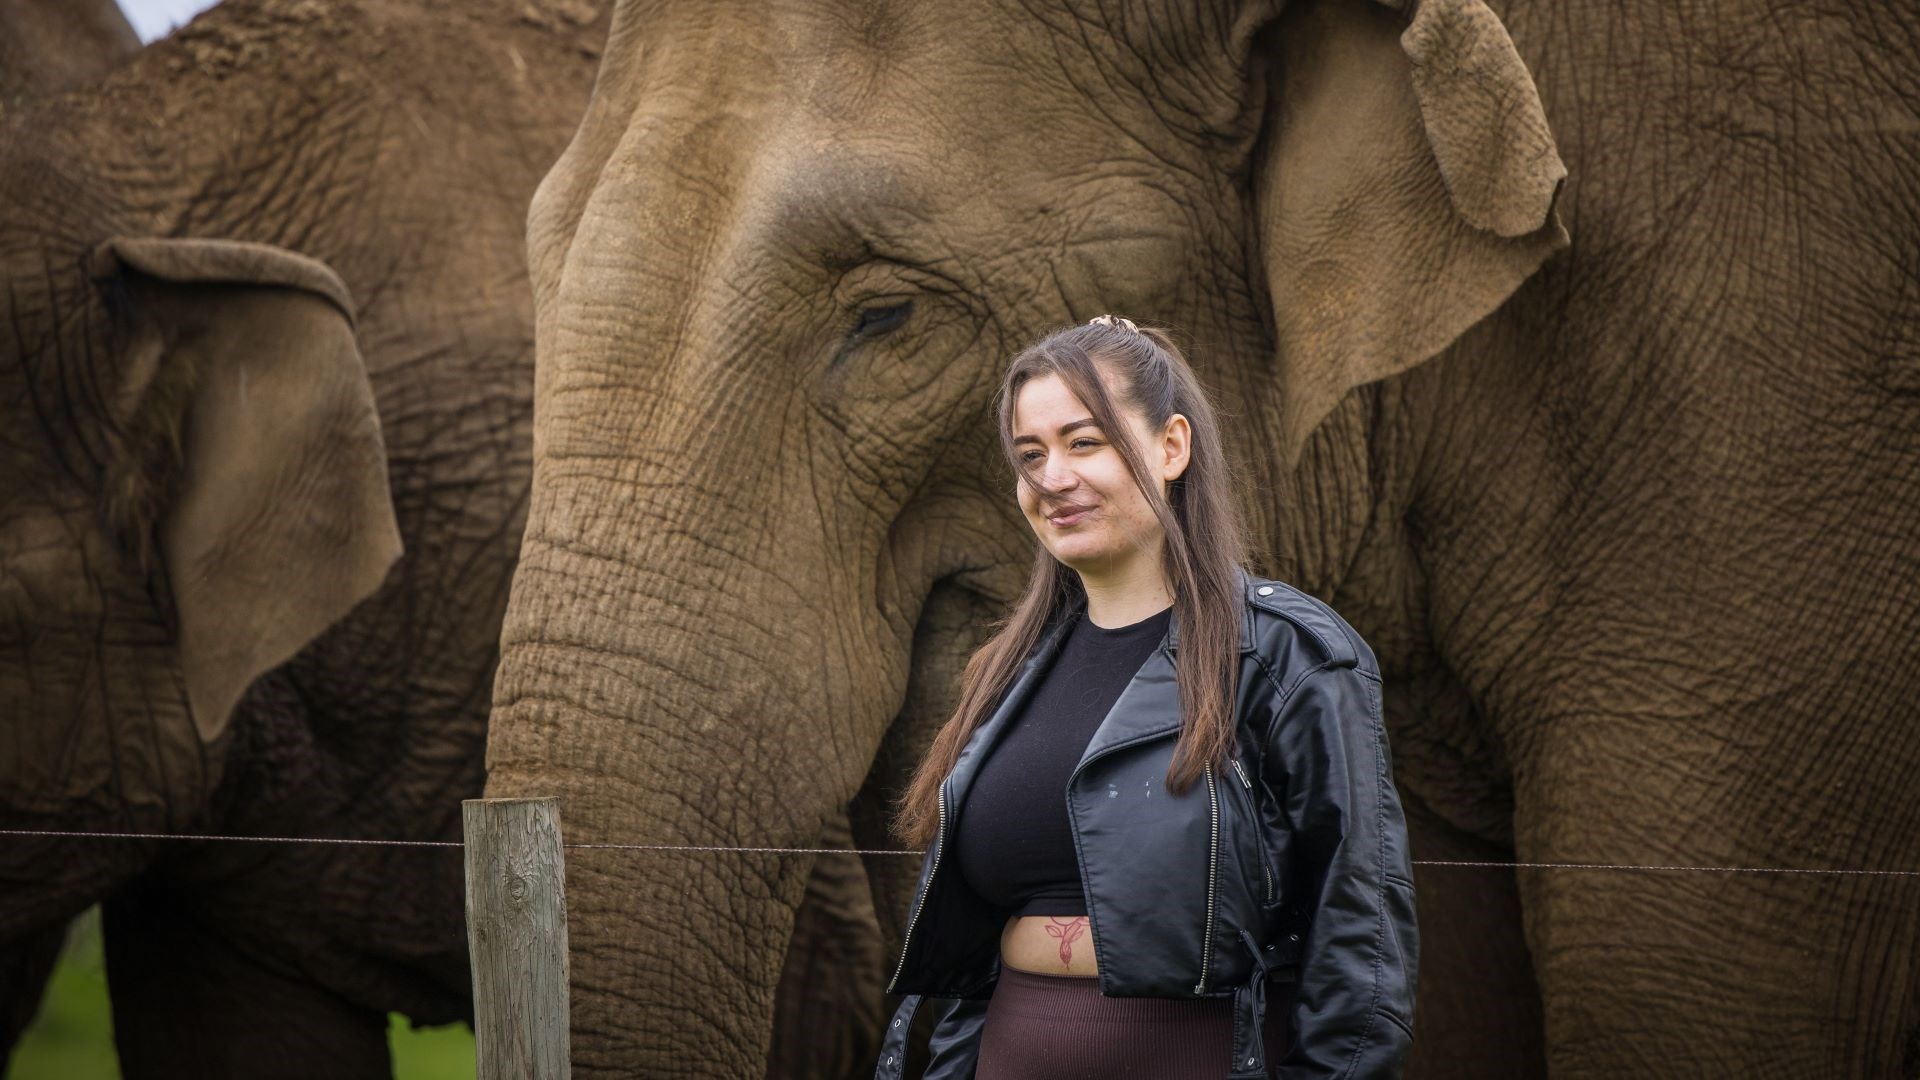 Woman stands in front of asian elephant as the elephant grazes peacefully in the background 